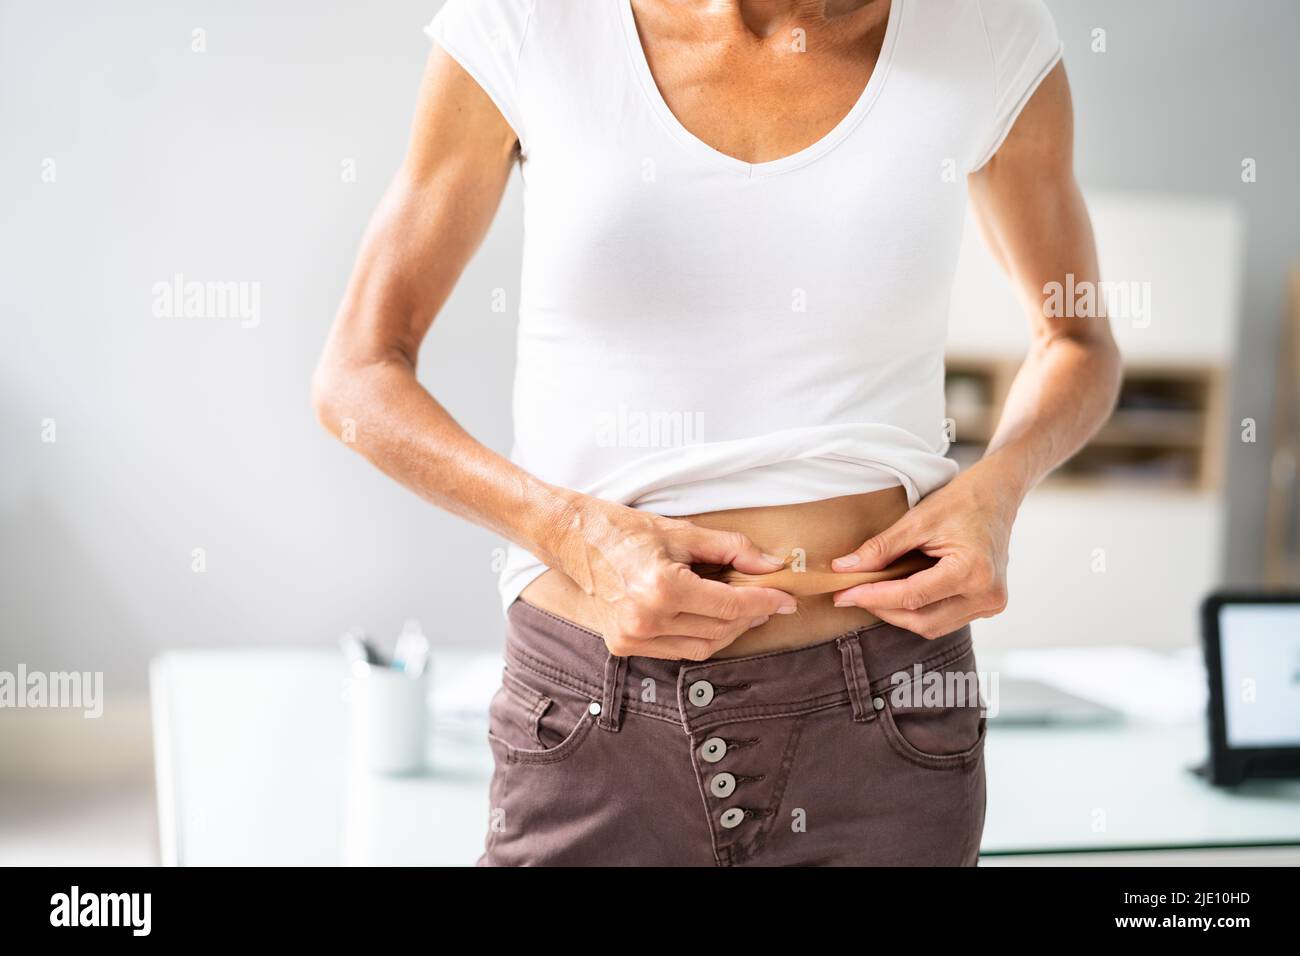 Stomach Fat Liposuction And Diet. Stomach Skin Pinch Stock Photo